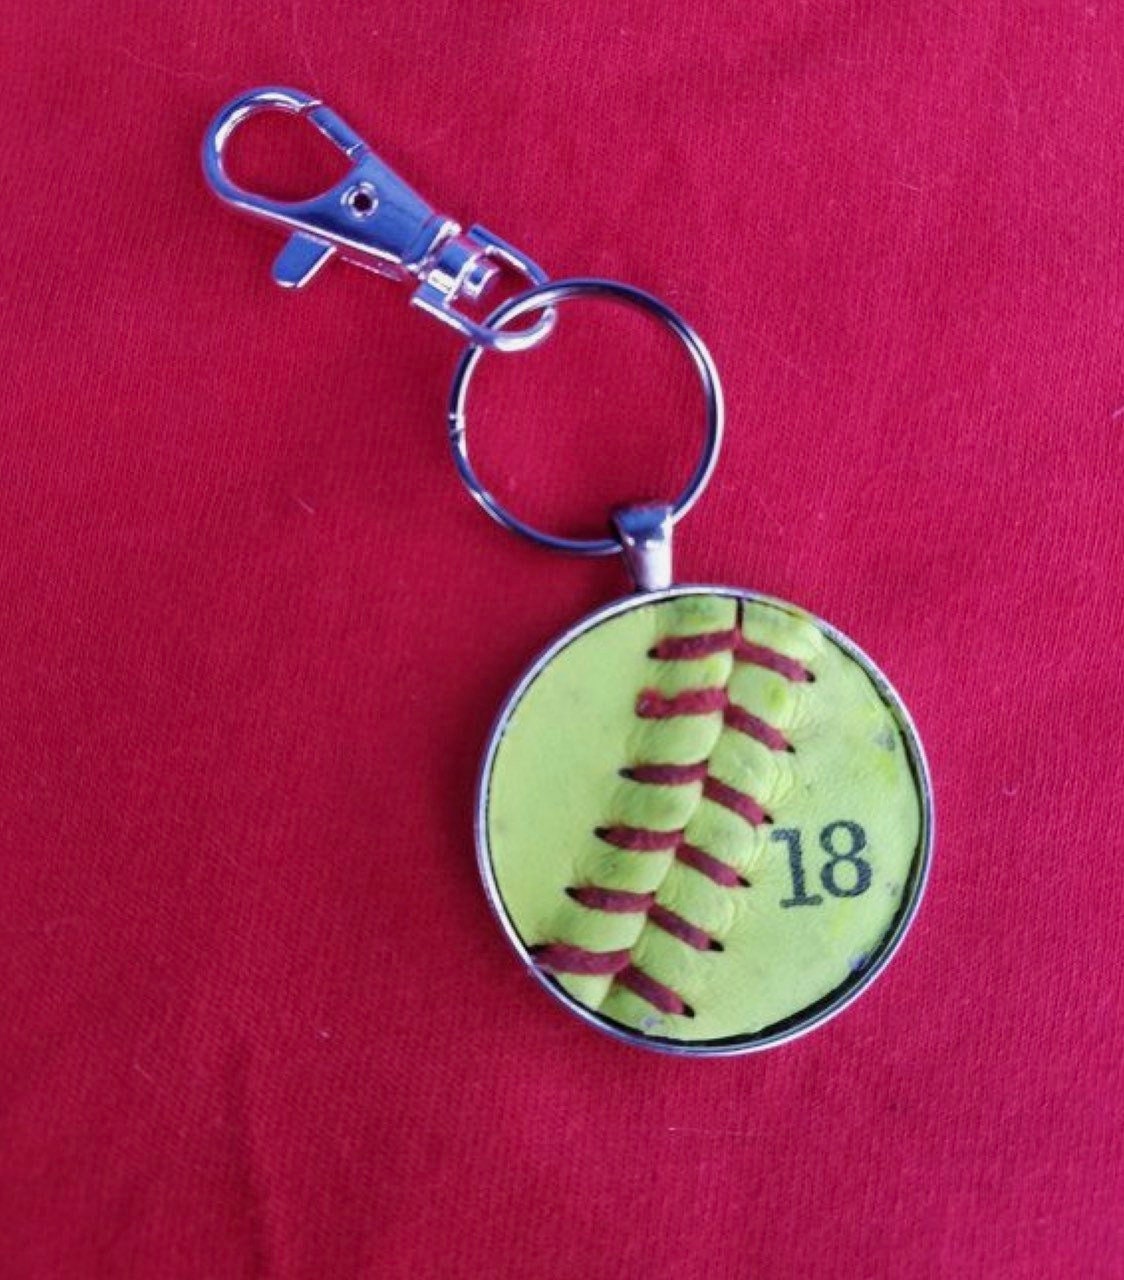 9 piece Keychain kit Round ( Your choice of colors) Make 3 Key Chains 38 mm Base setting, Matching Glass and keychain